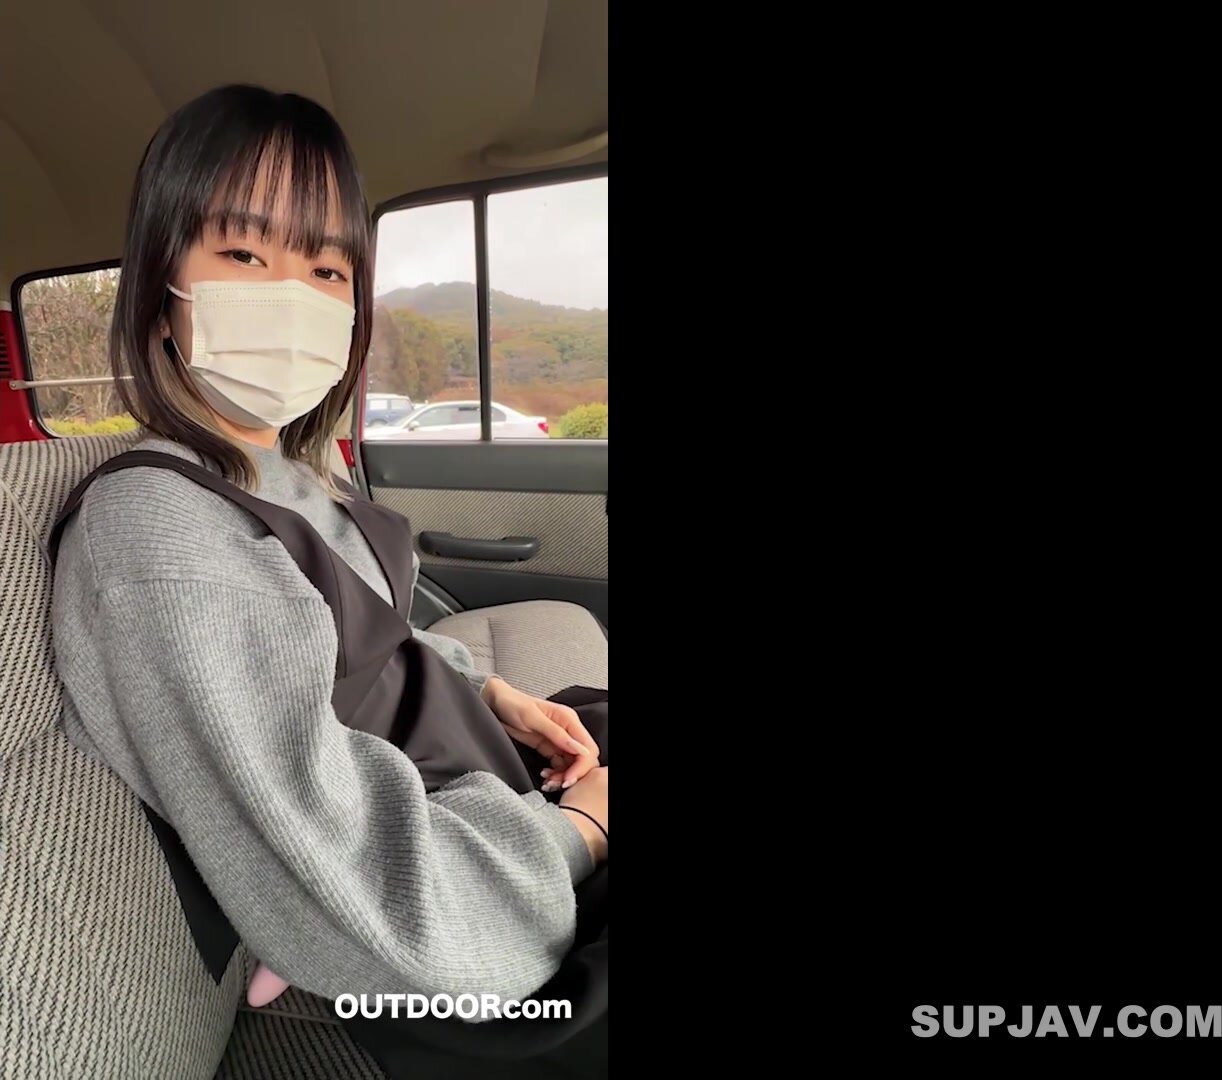 Stiff college girl drips love juice as she is forced andquot;forced’ to do an exposed snooze in the car next to a worker taking a break in a park parking lot! She is forced andquot;forced to do an in-vehicle nappy next to a workman who is taking a break i